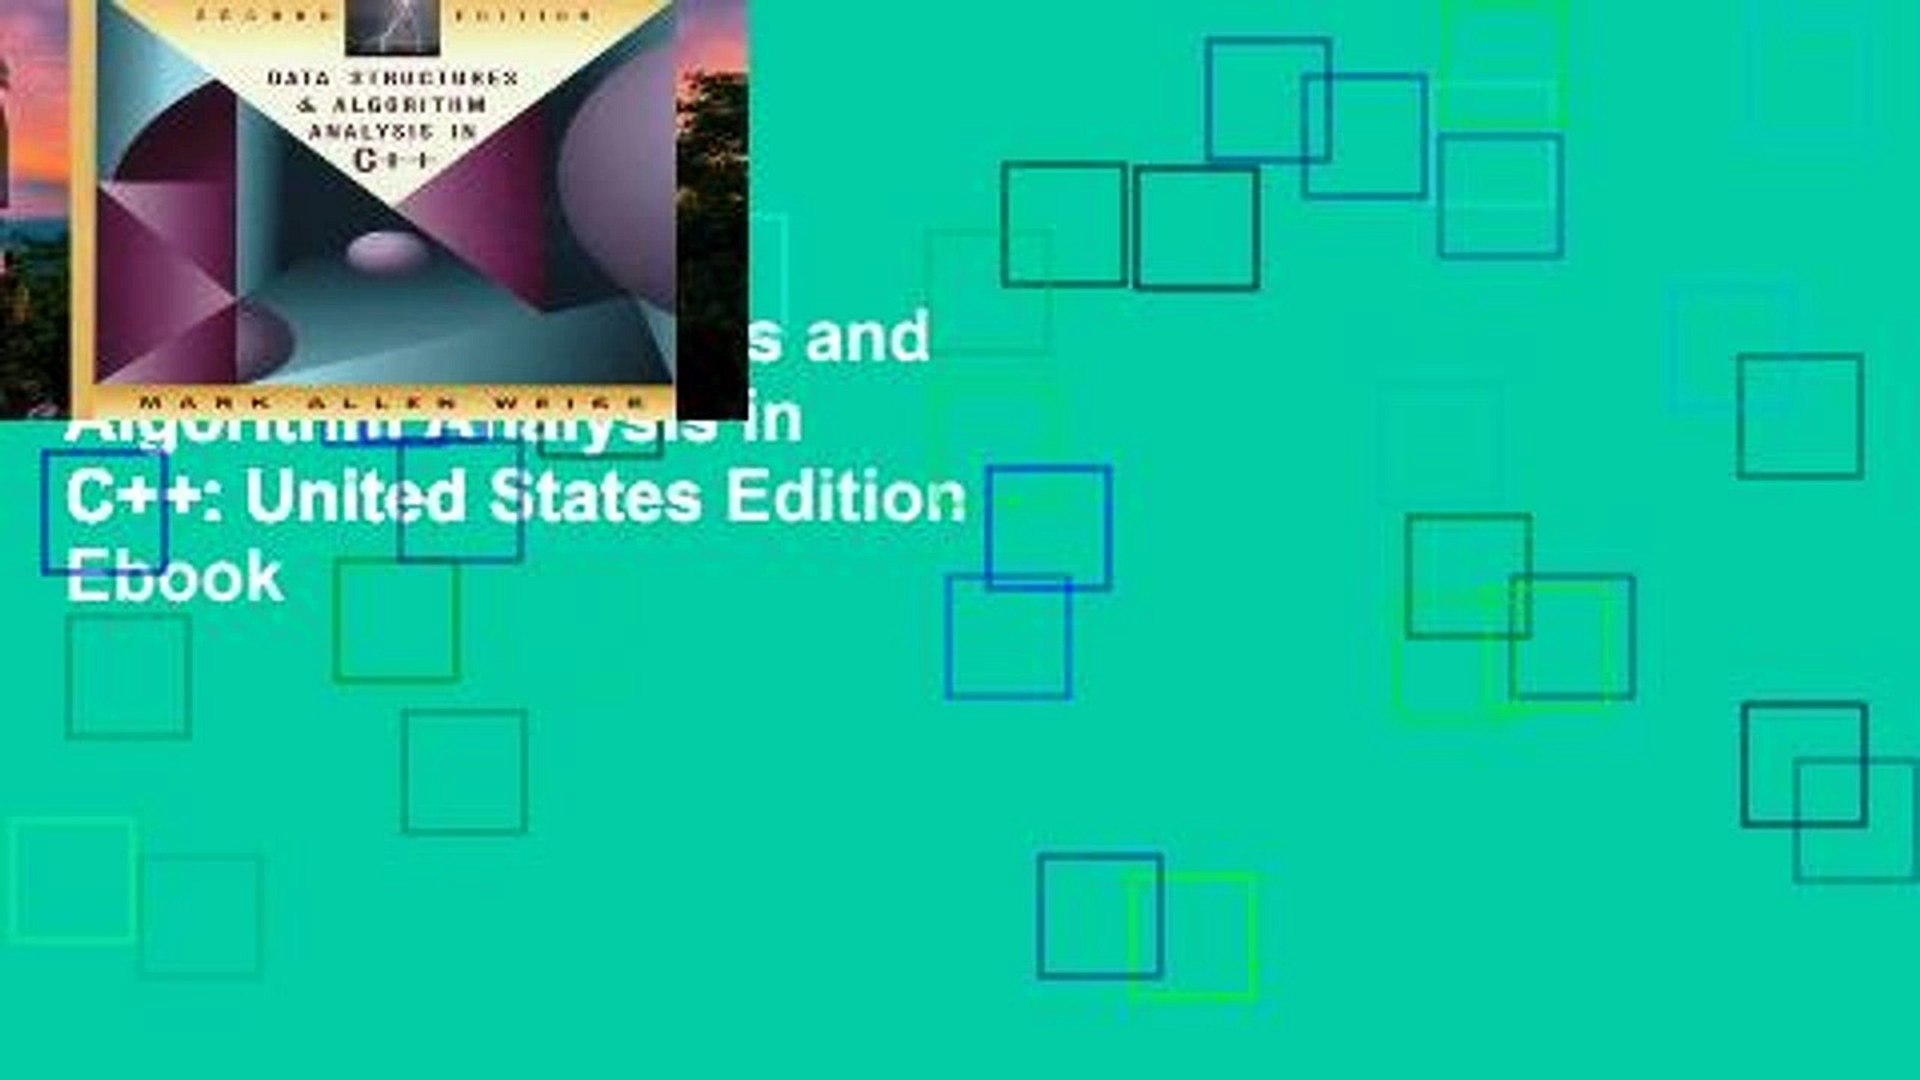 View Data Structures and Algorithm Analysis in C++: United States Edition Ebook